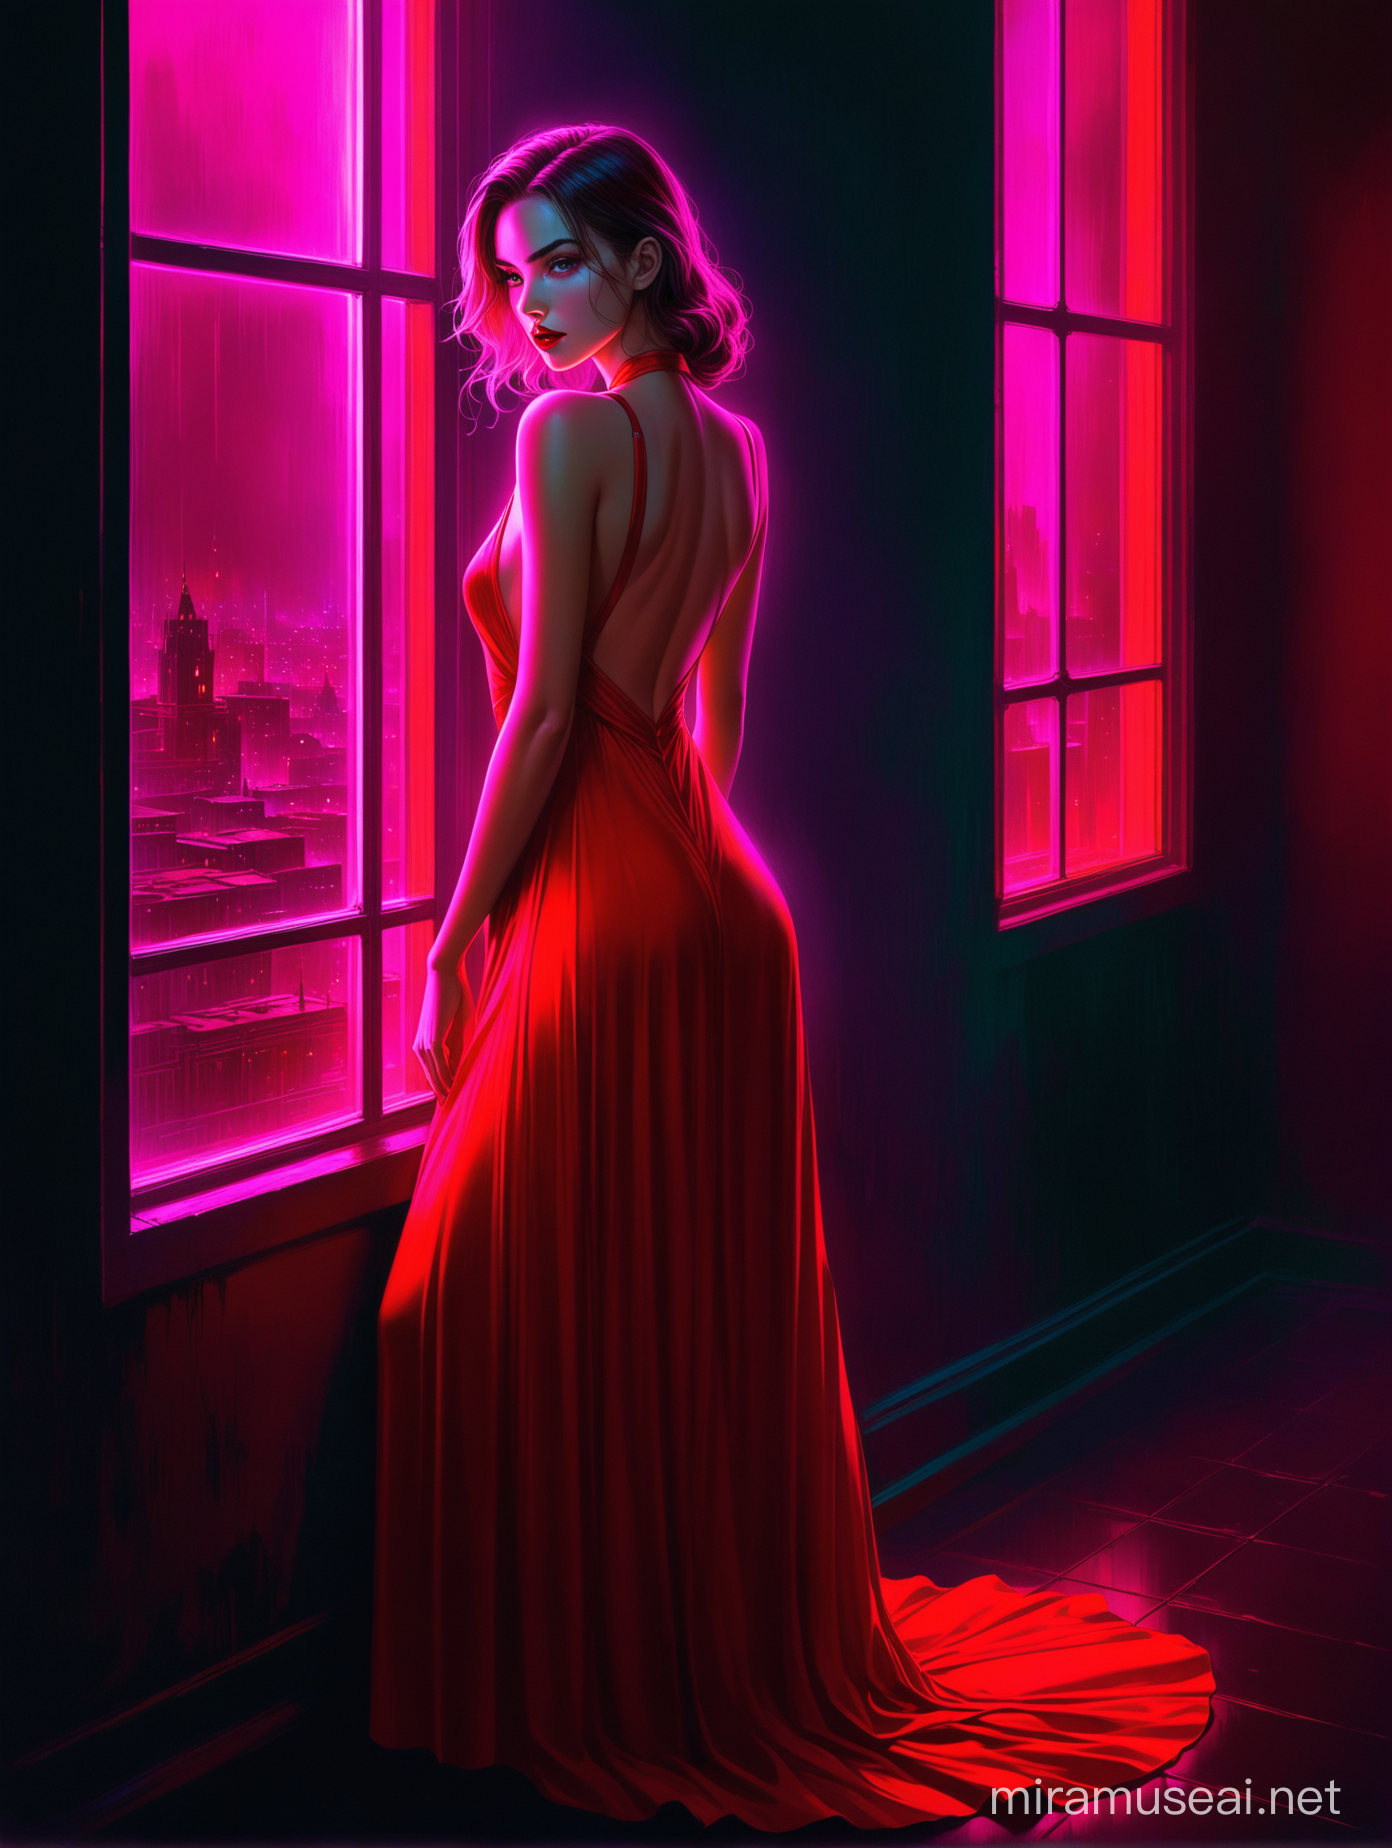 Beautiful Young Woman in Red Dress Gazing Anxiously out a Dark Window